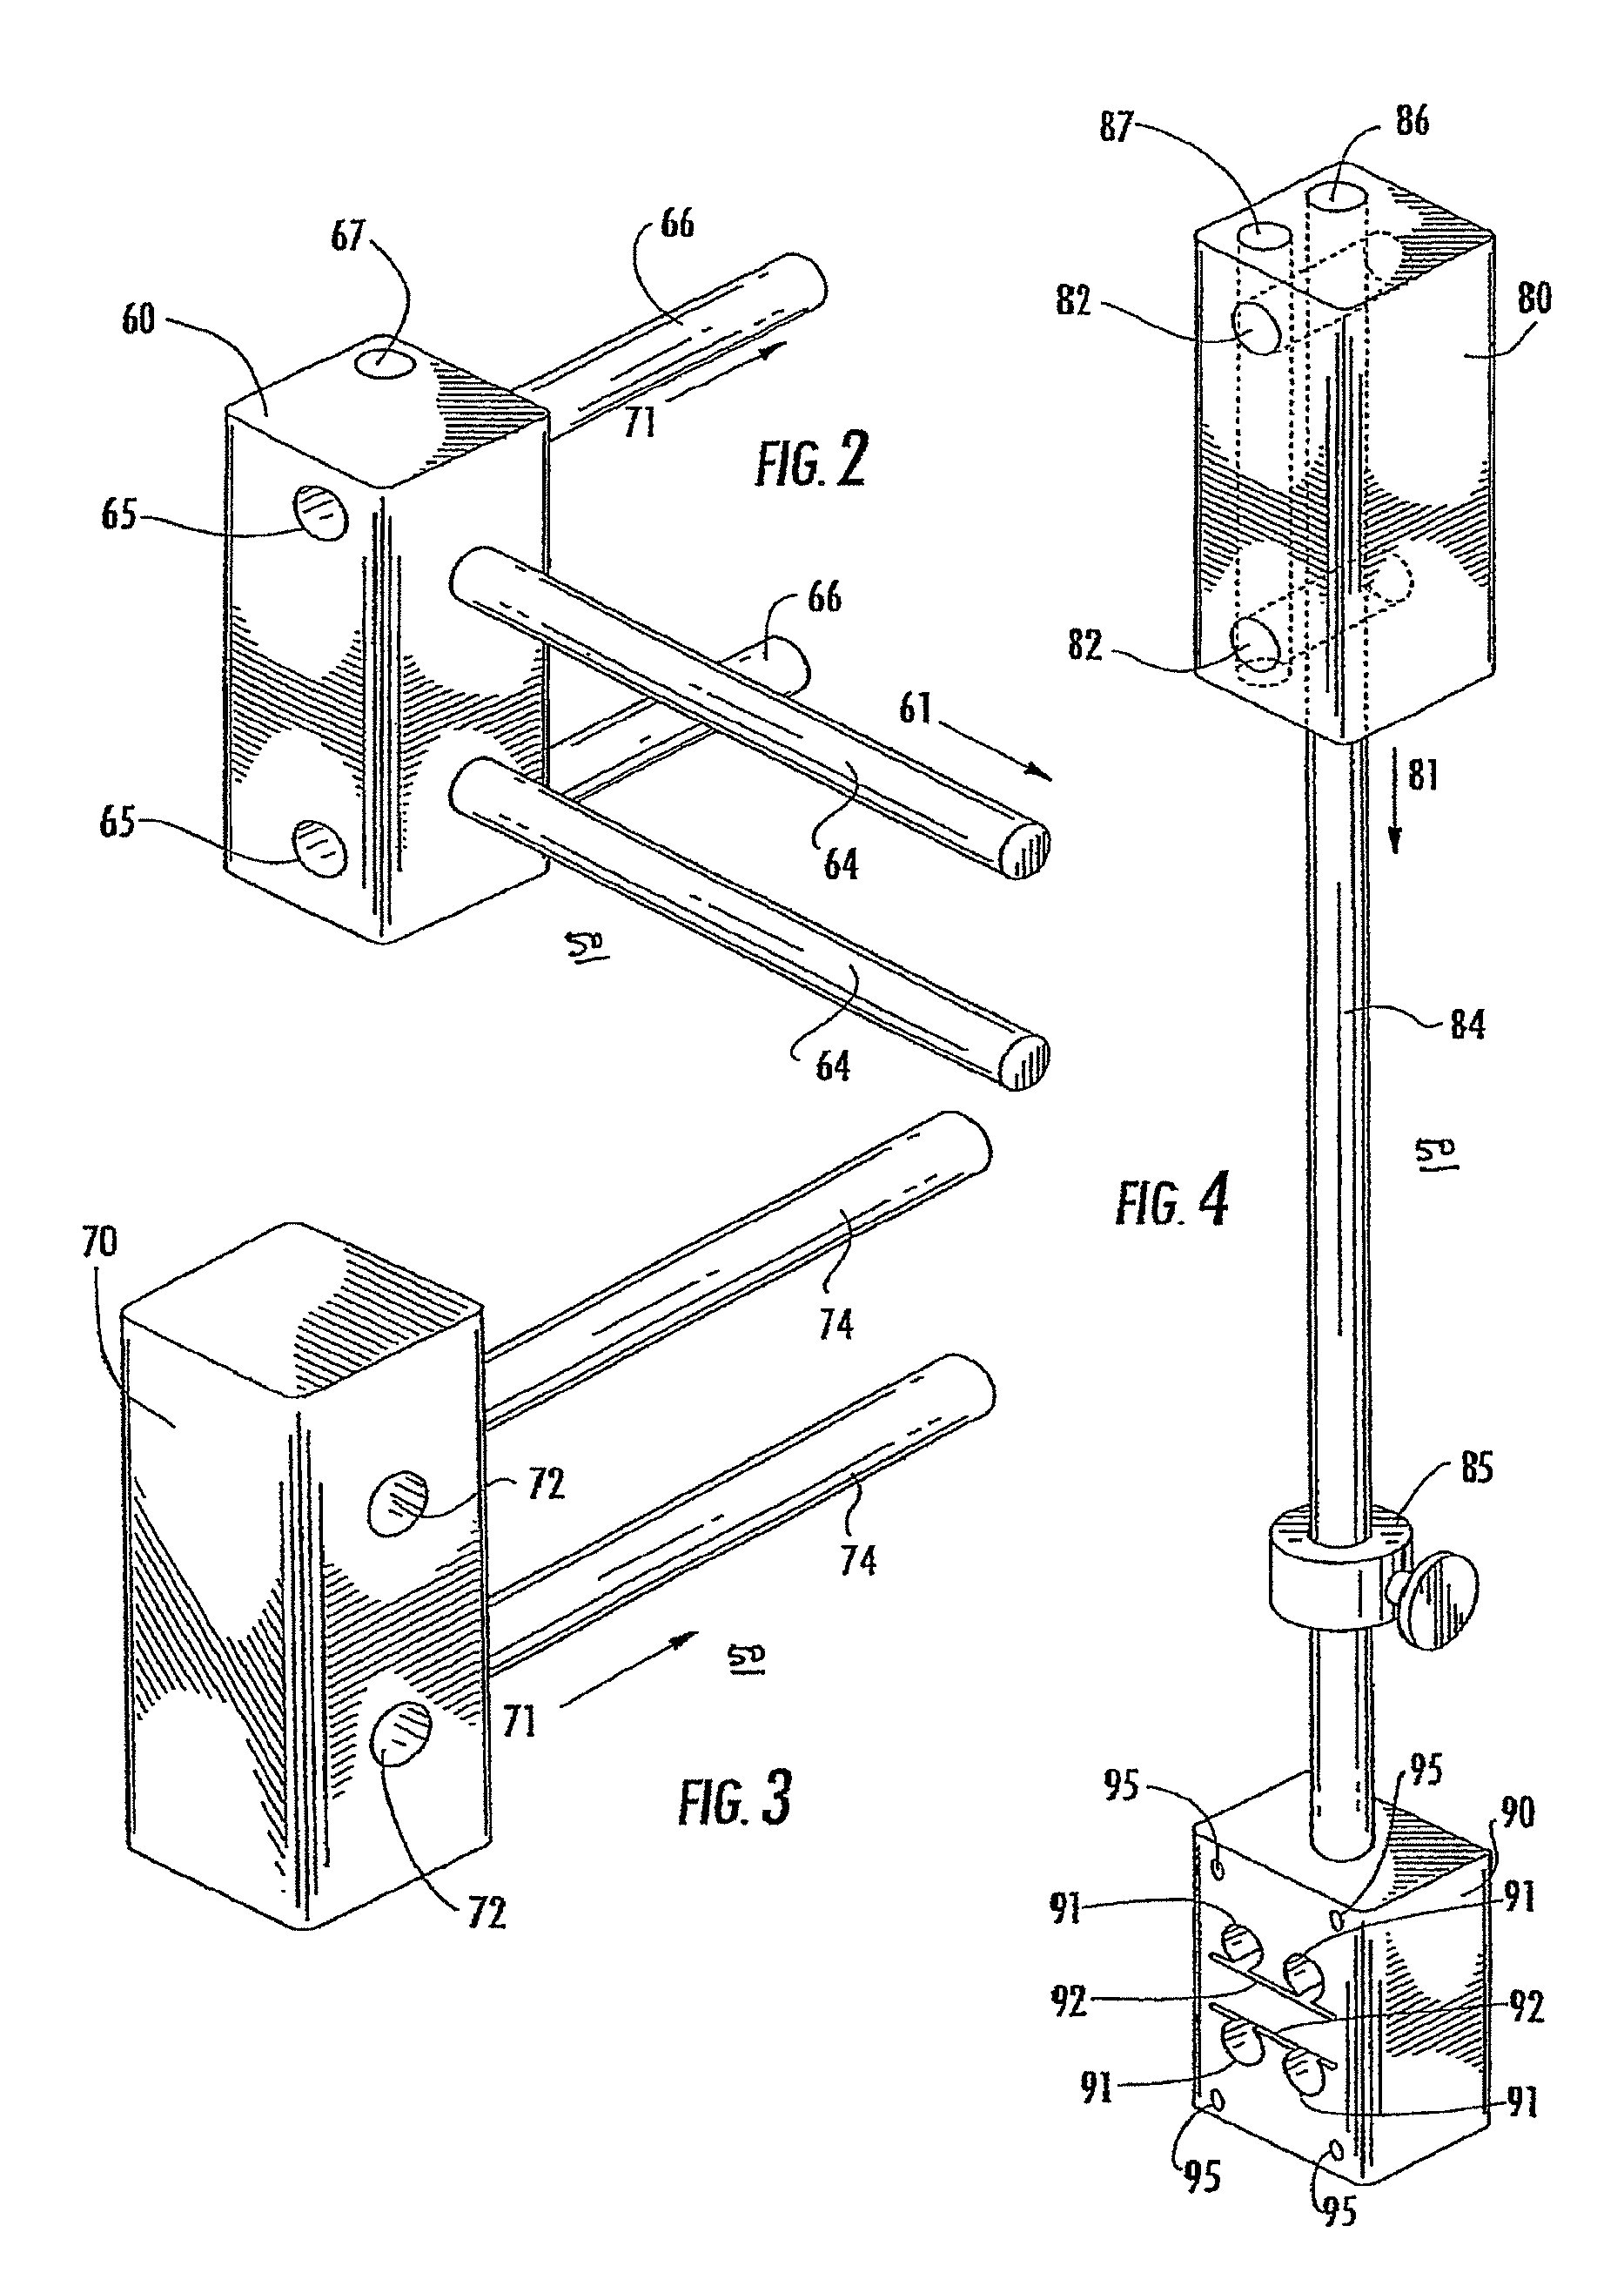 Method of preparing an ankle joint for replacement, joint prosthesis, and cutting alignment apparatus for use in performing an arthroplasty procedure